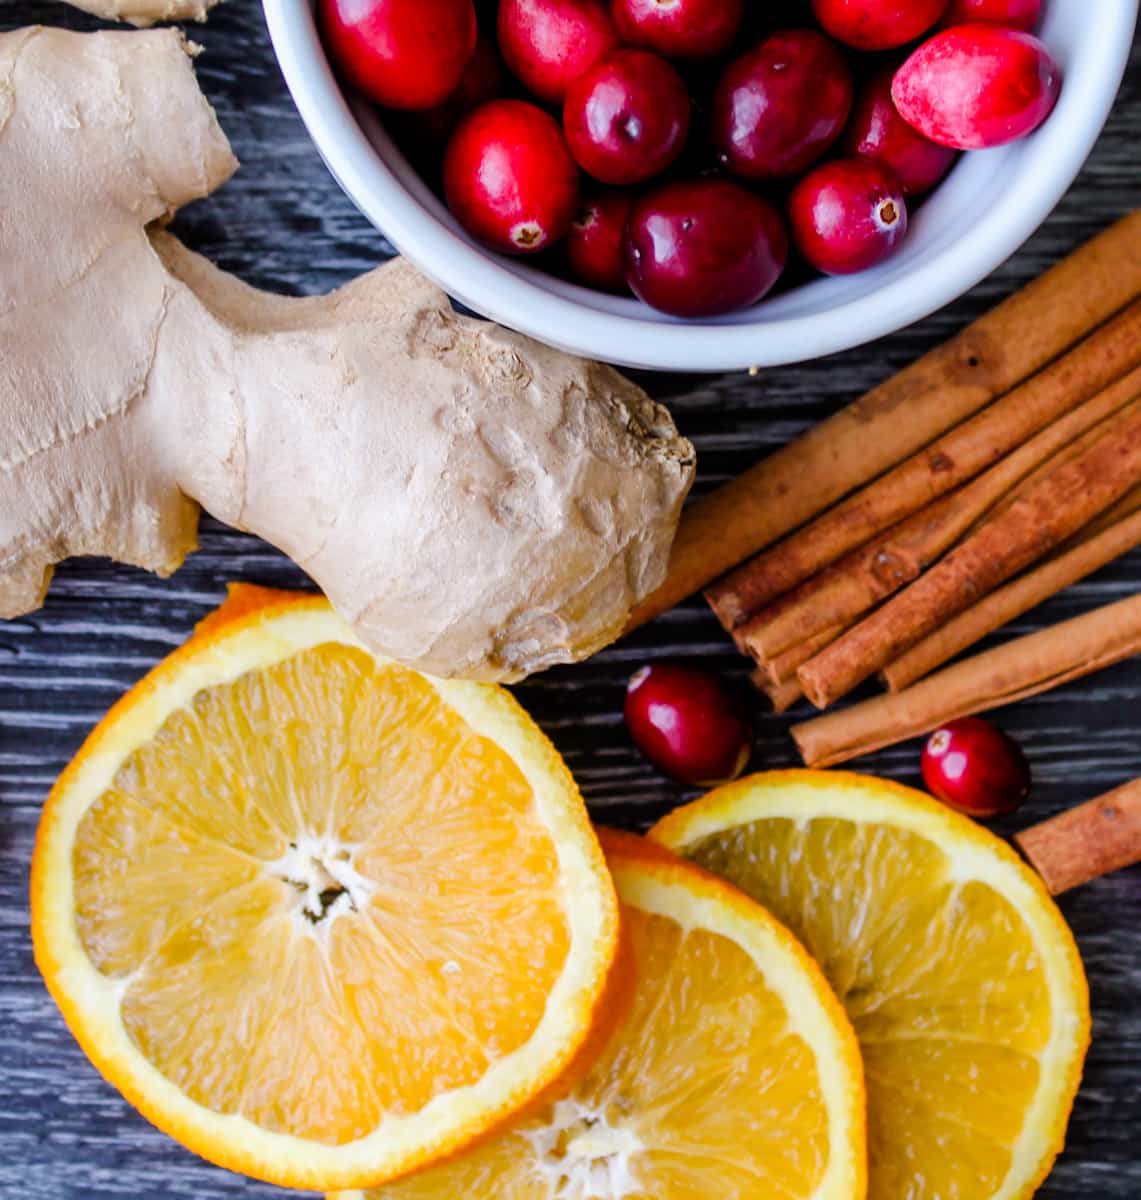 ginger, orange slices, cranberries and cinnamon sticks on a counter.